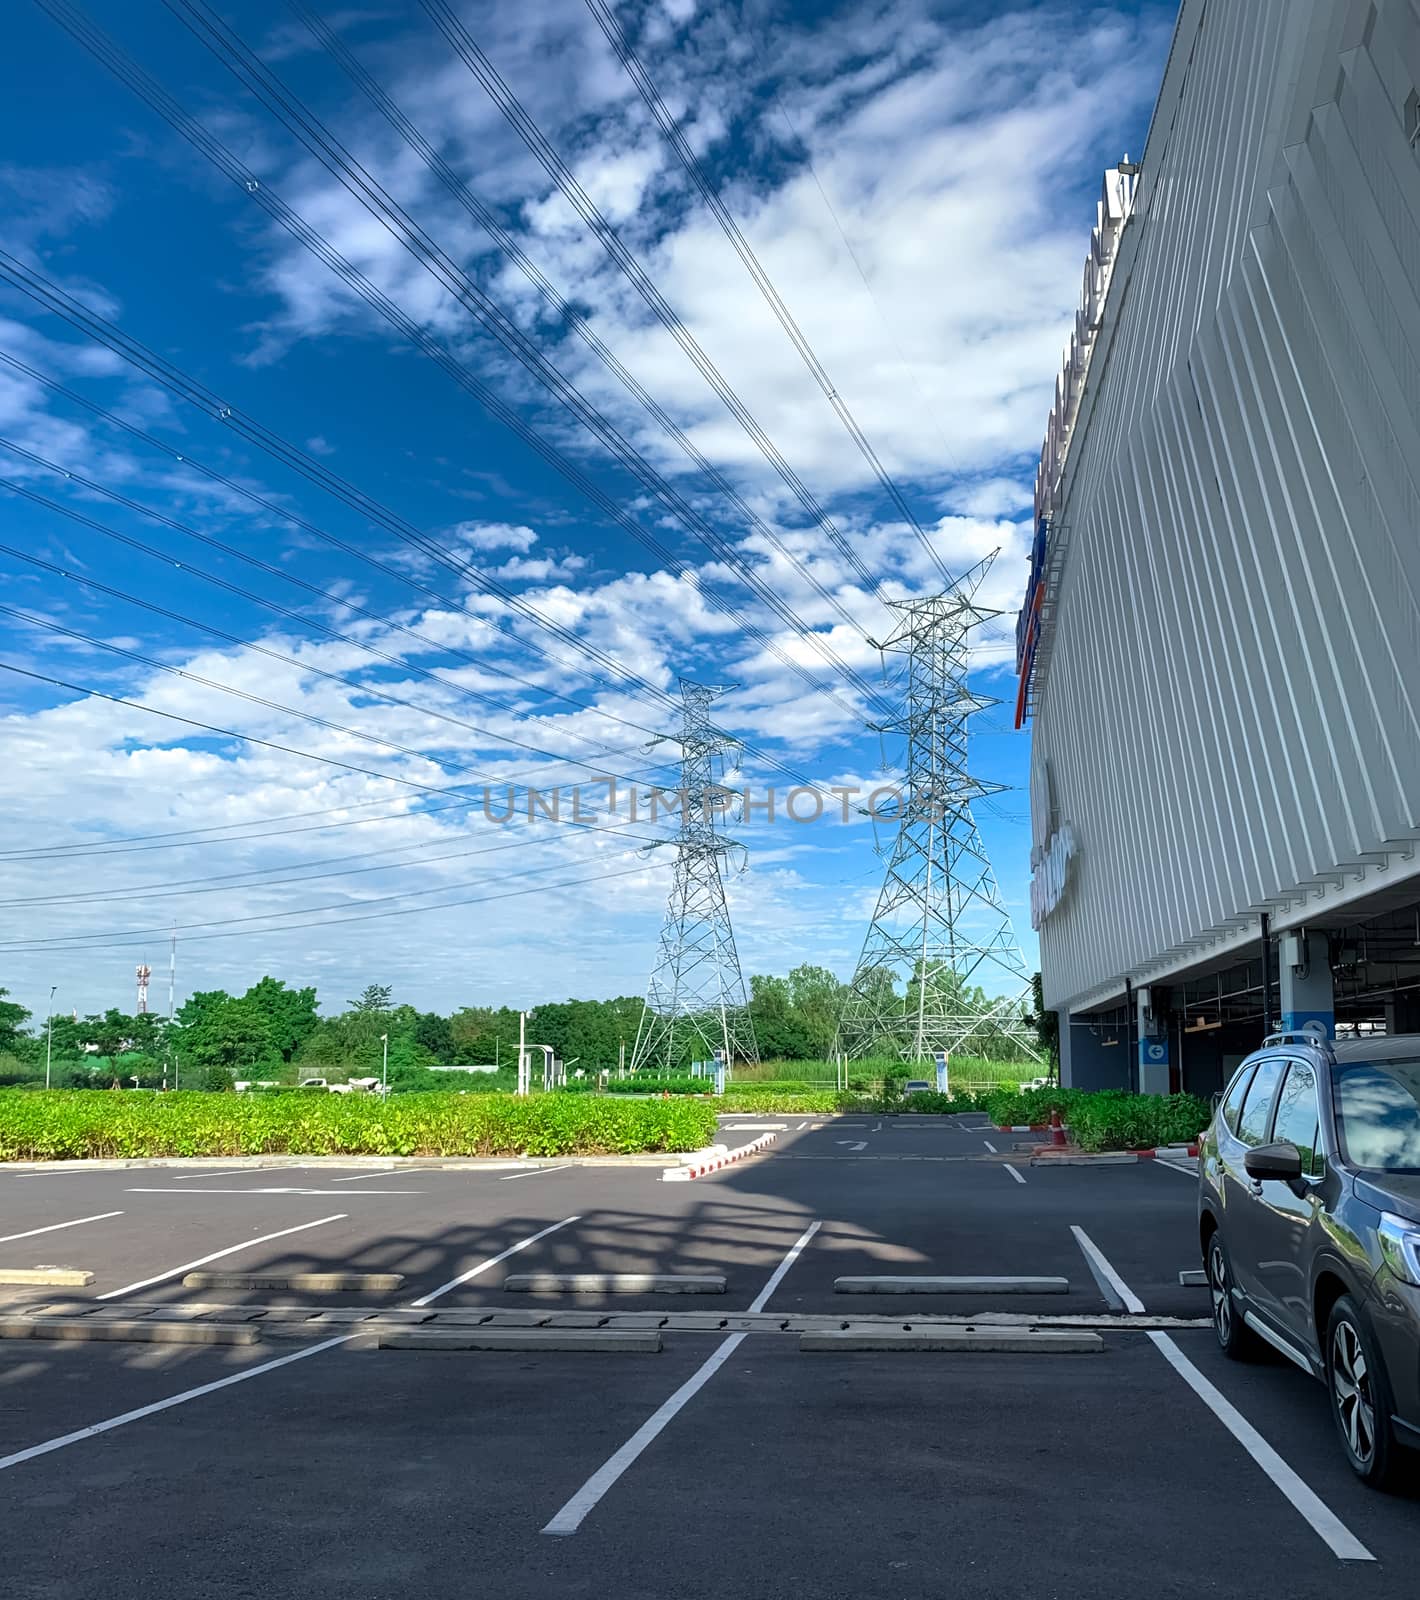 Car parking space at shopping mall for customer service. Outdoor by Fahroni